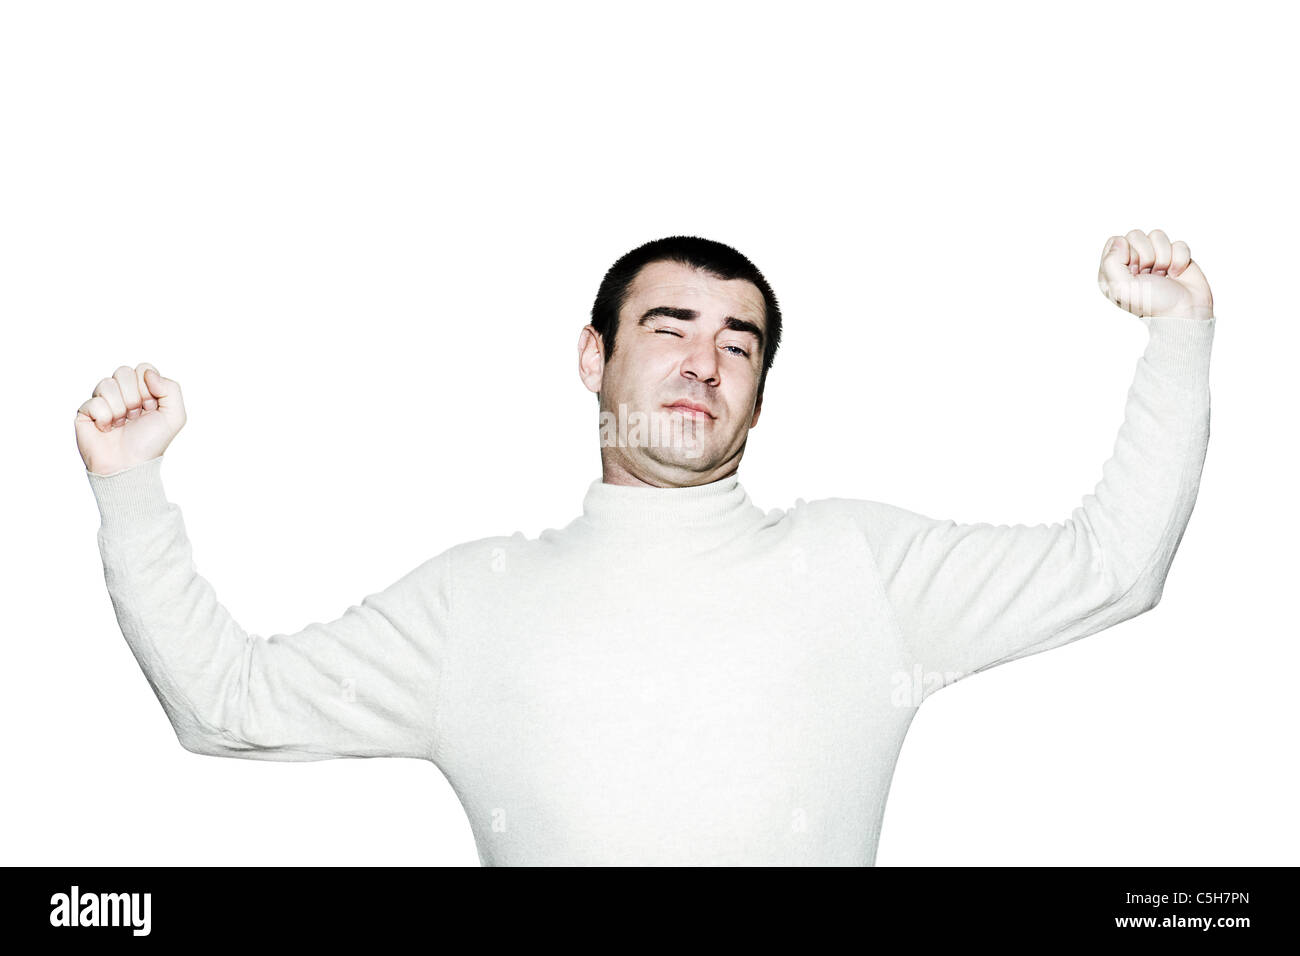 Portrait of a lazy man stretching out his arms in studio on white isolated background Stock Photo